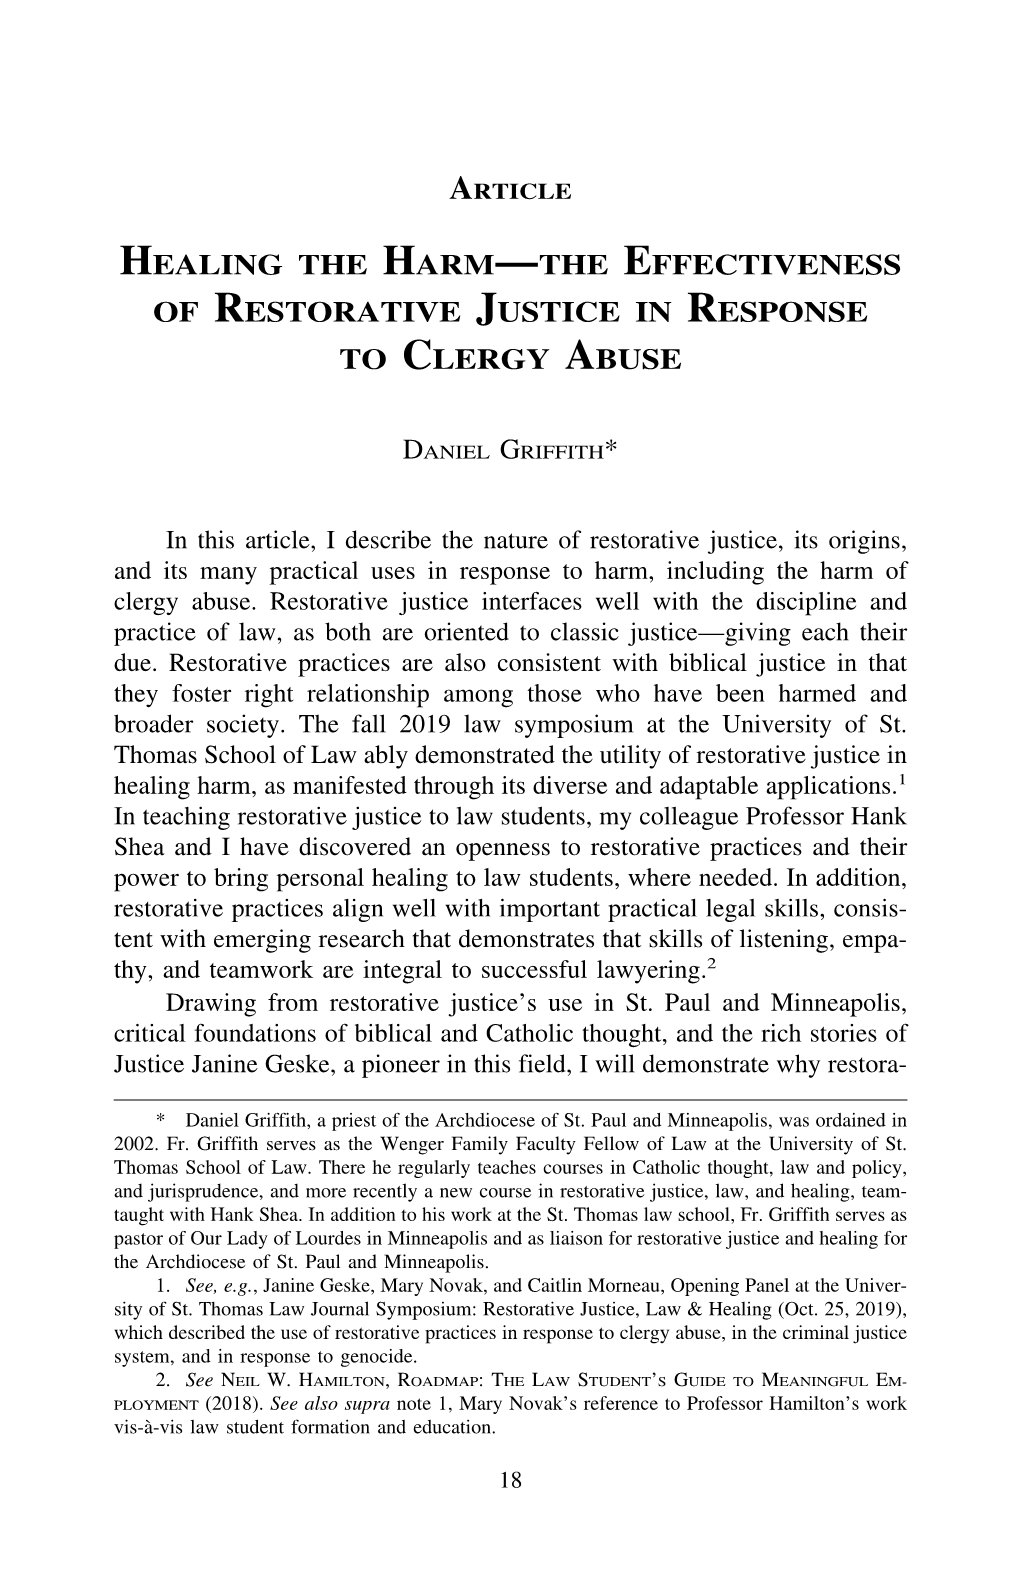 The Effectiveness of Restorative Justice in Response to Clergy Abuse